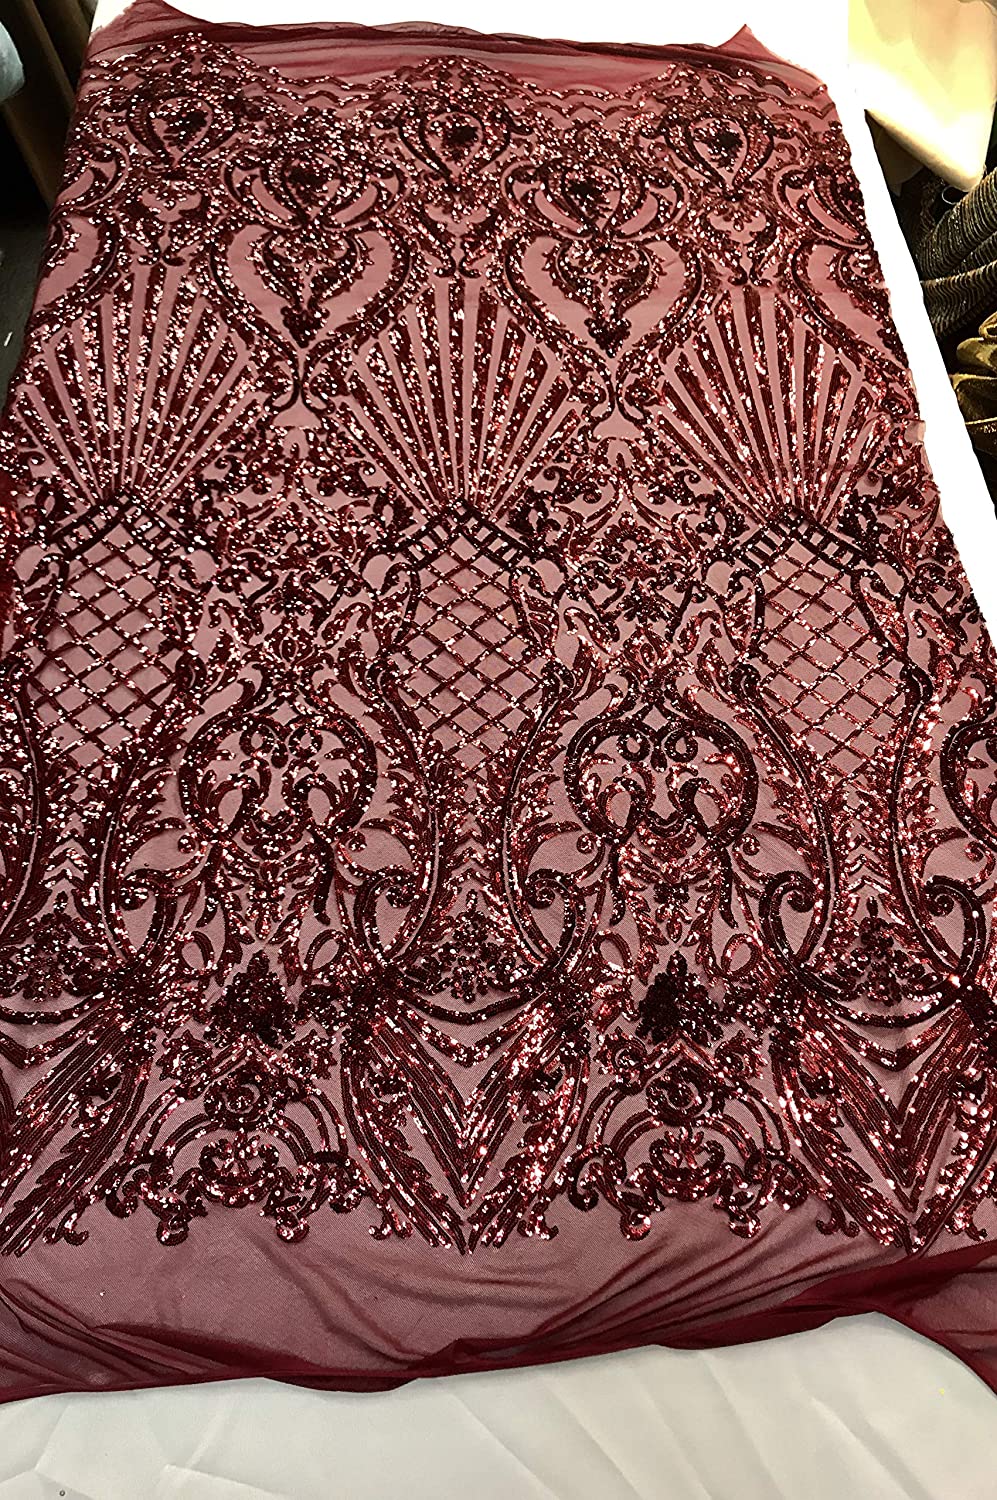 Damask Sequins Design on a 4 Way Stretch Mesh Fabric - for Night Gowns - Prom Dresses - (Burgundy on Burgundy, 1 Yard)